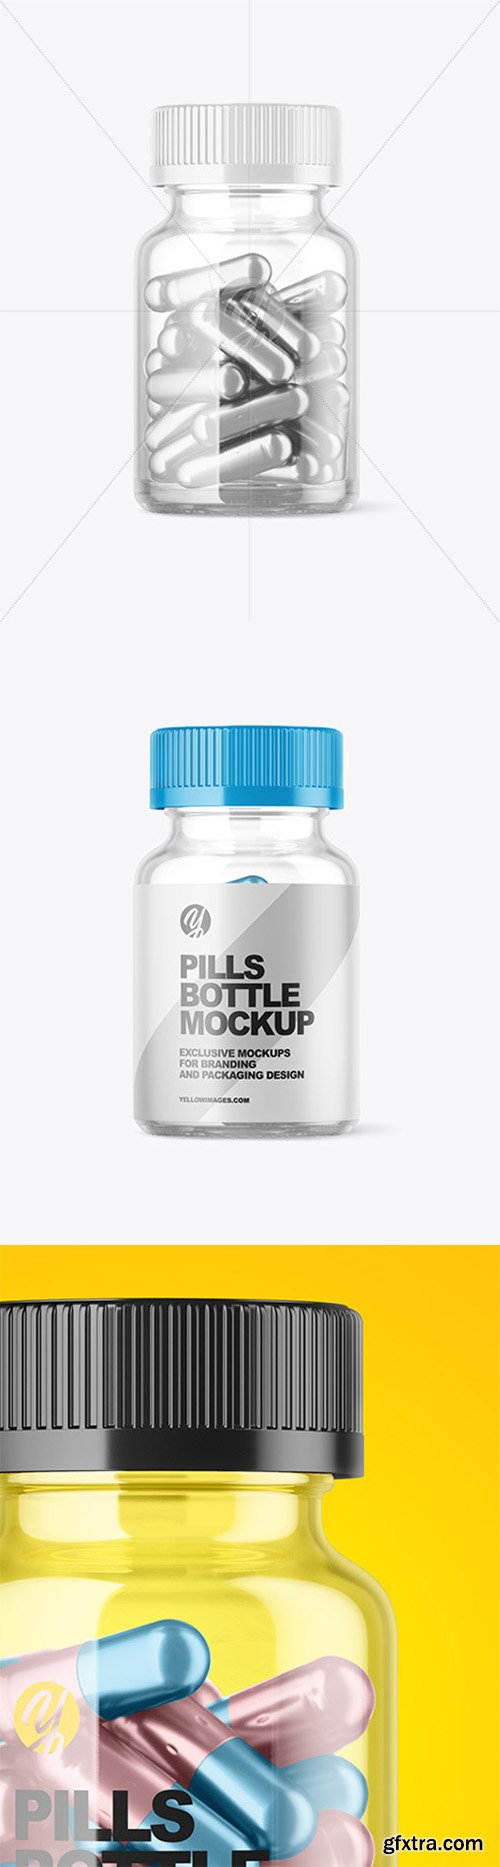 Download Clear Bottle With Metallized Pills Mockup 60532 Gfxtra Yellowimages Mockups